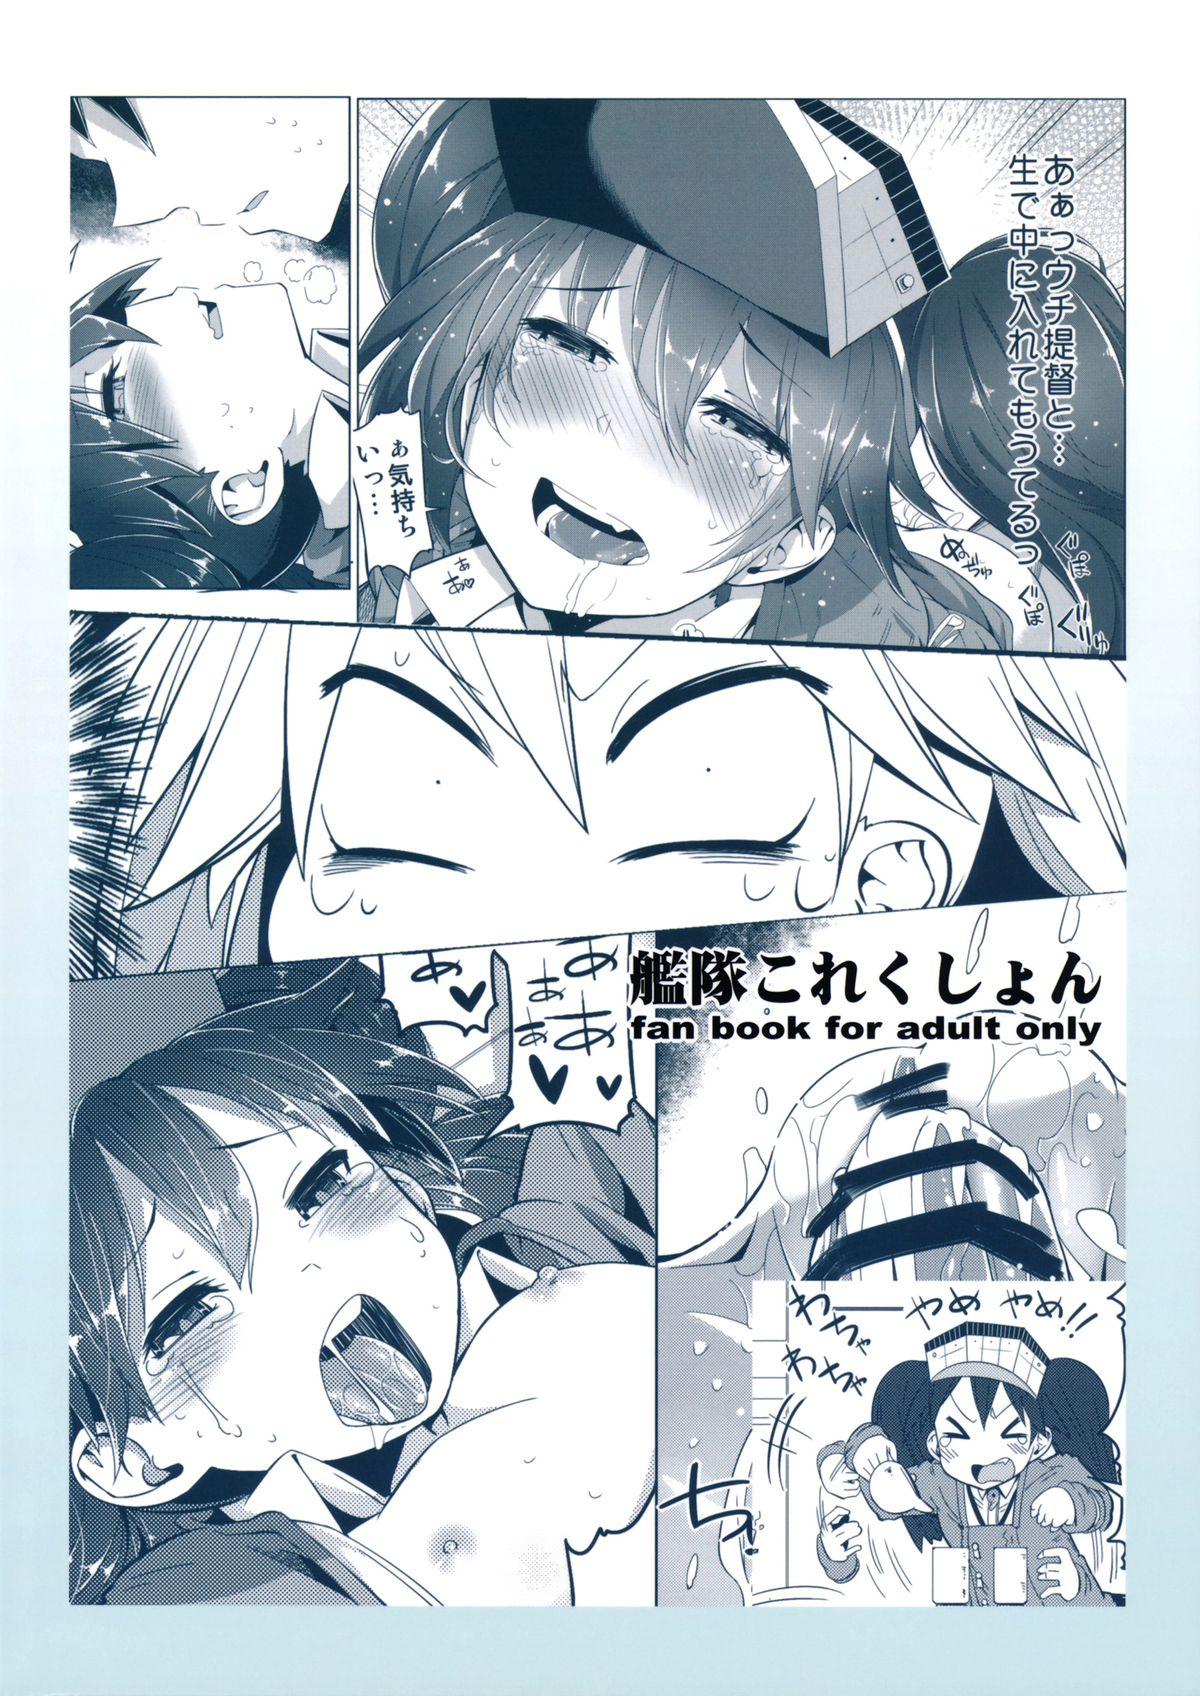 Chat Koi suru Otome no Miryoku wa Mune dake janai! | The Allure of a Maiden in Love isn't Only in Her Chest! - Kantai collection Gay Rimming - Page 22